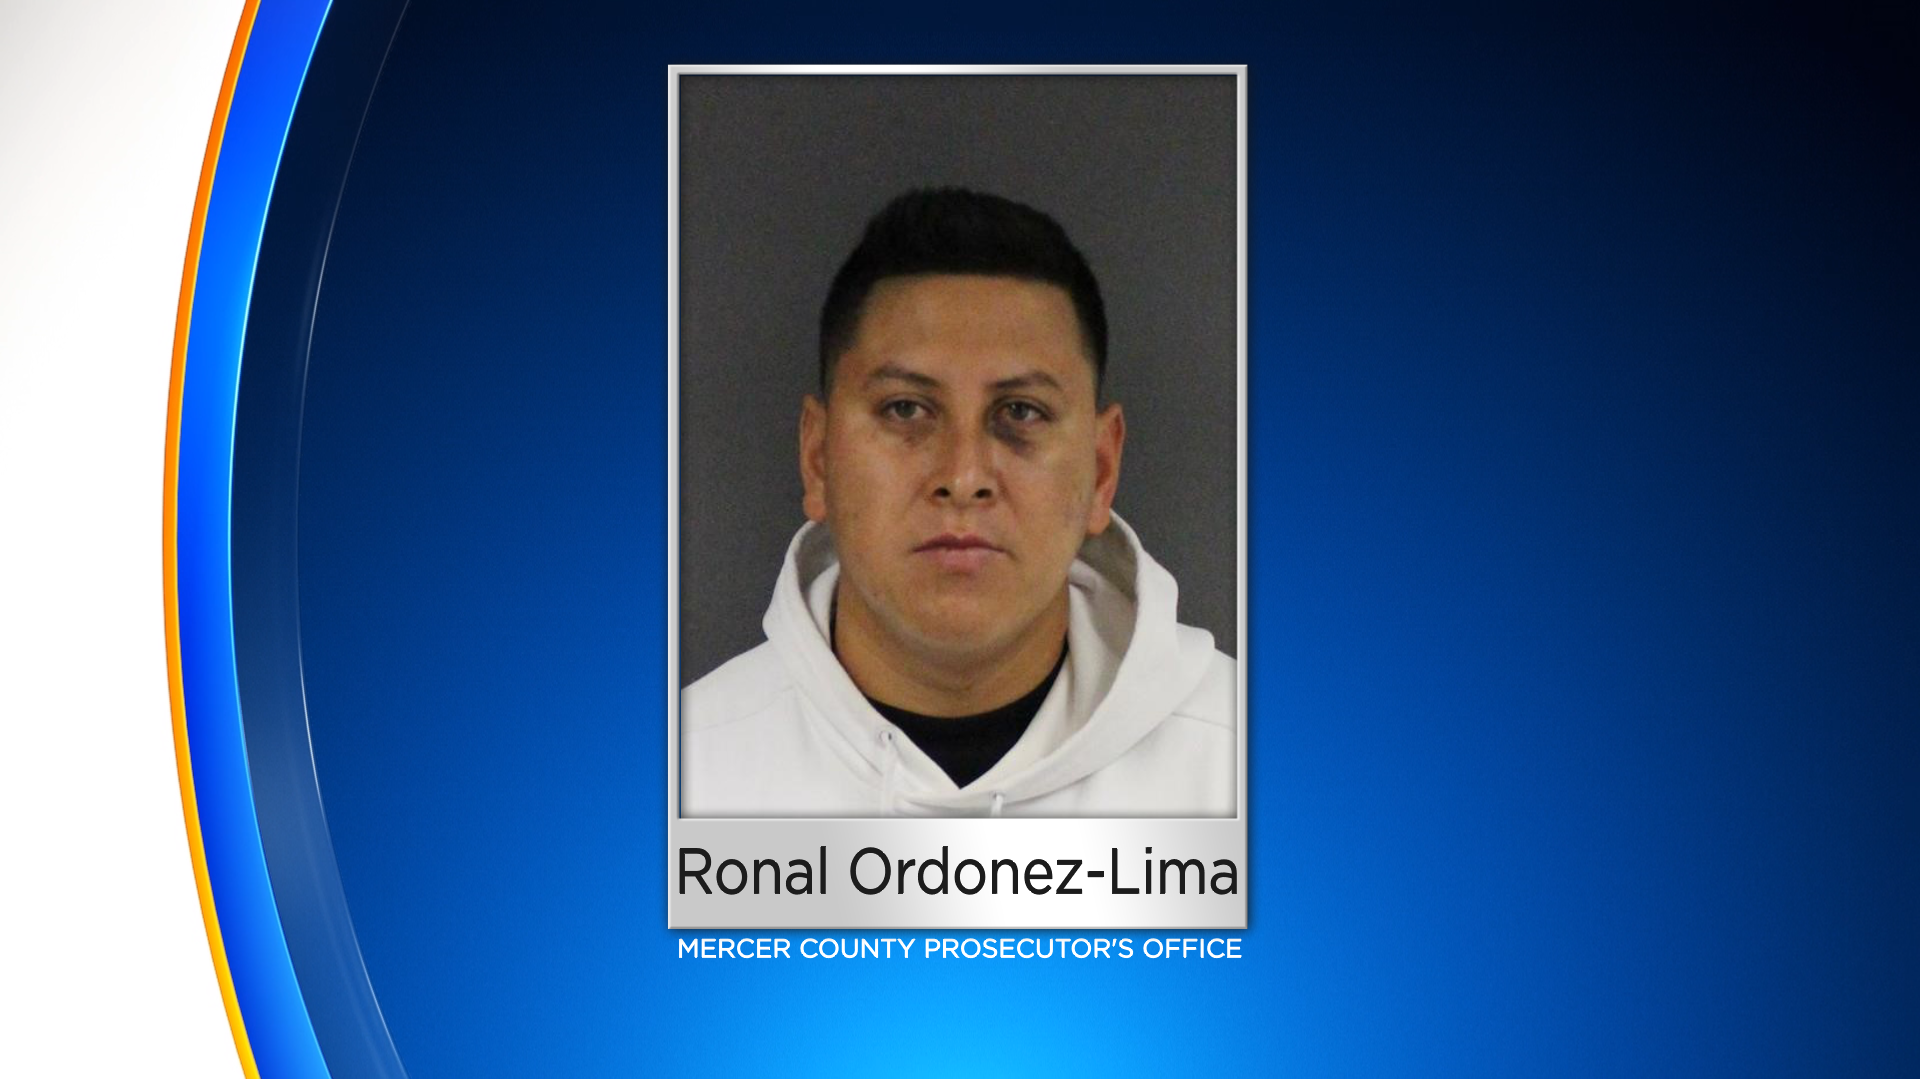 Ronal Ordonez-Lima Arrested, Charged With Two Counts Of Murder In Connection To Trenton Christmas Day Arson